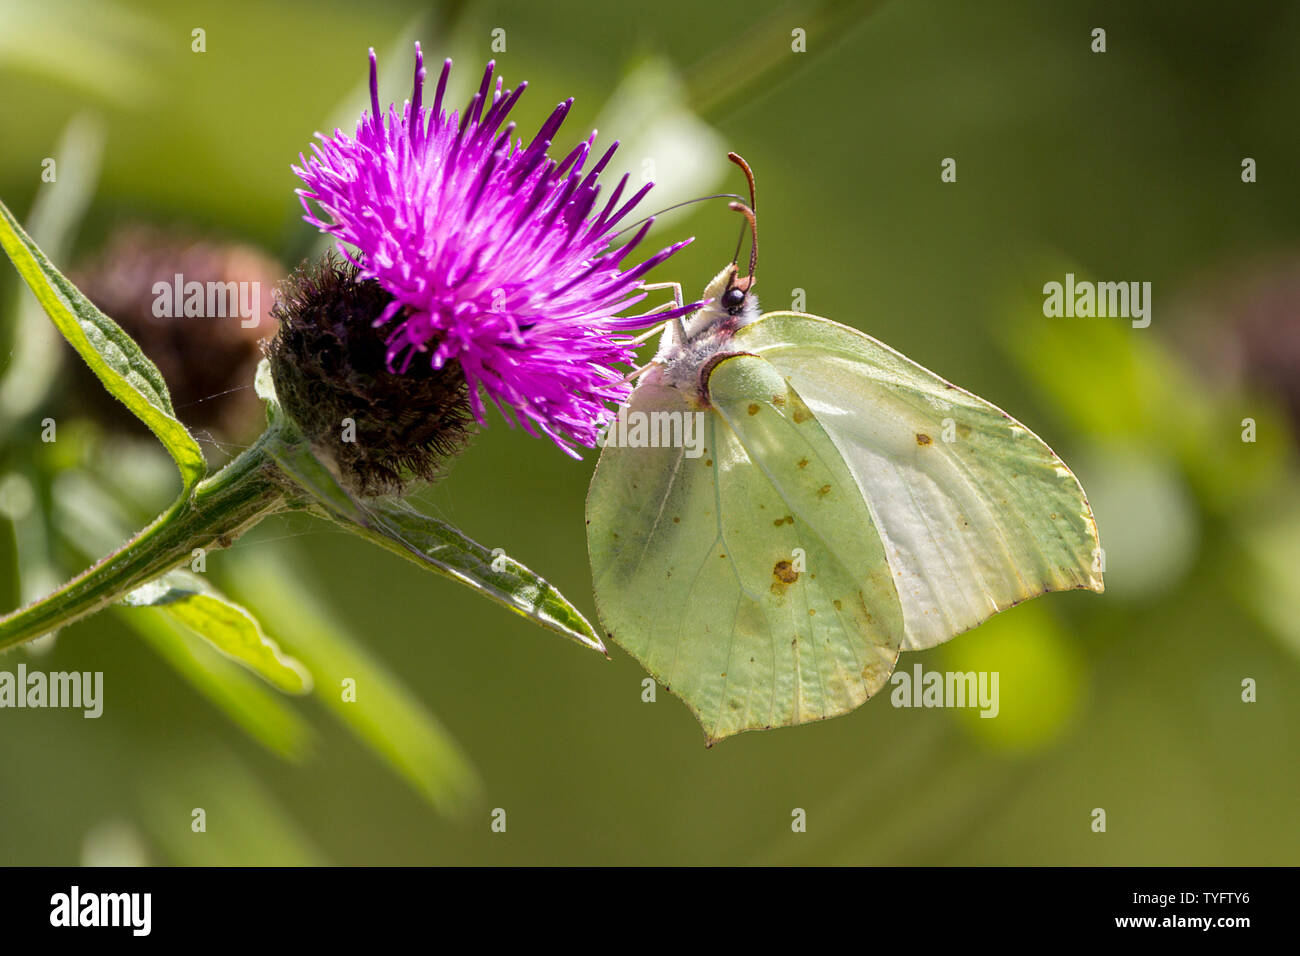 Brimstone butterfly (Gonepteryx rhamni) uniquely shaped wings paler female adult in summertime on purple floret of a knapweed perennial. Stock Photo